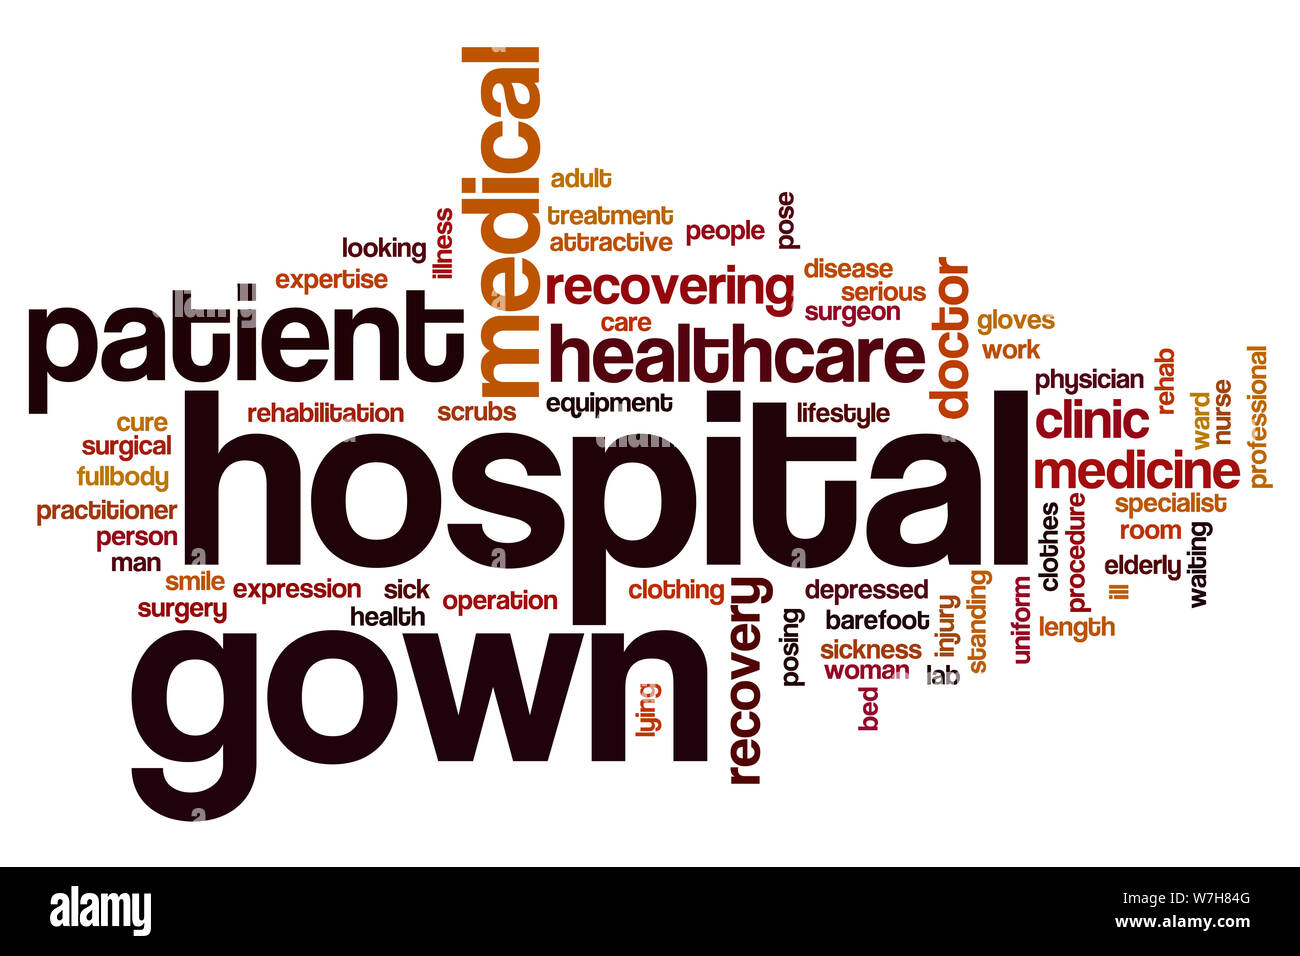 Hospital gown word cloud concept Stock Photo